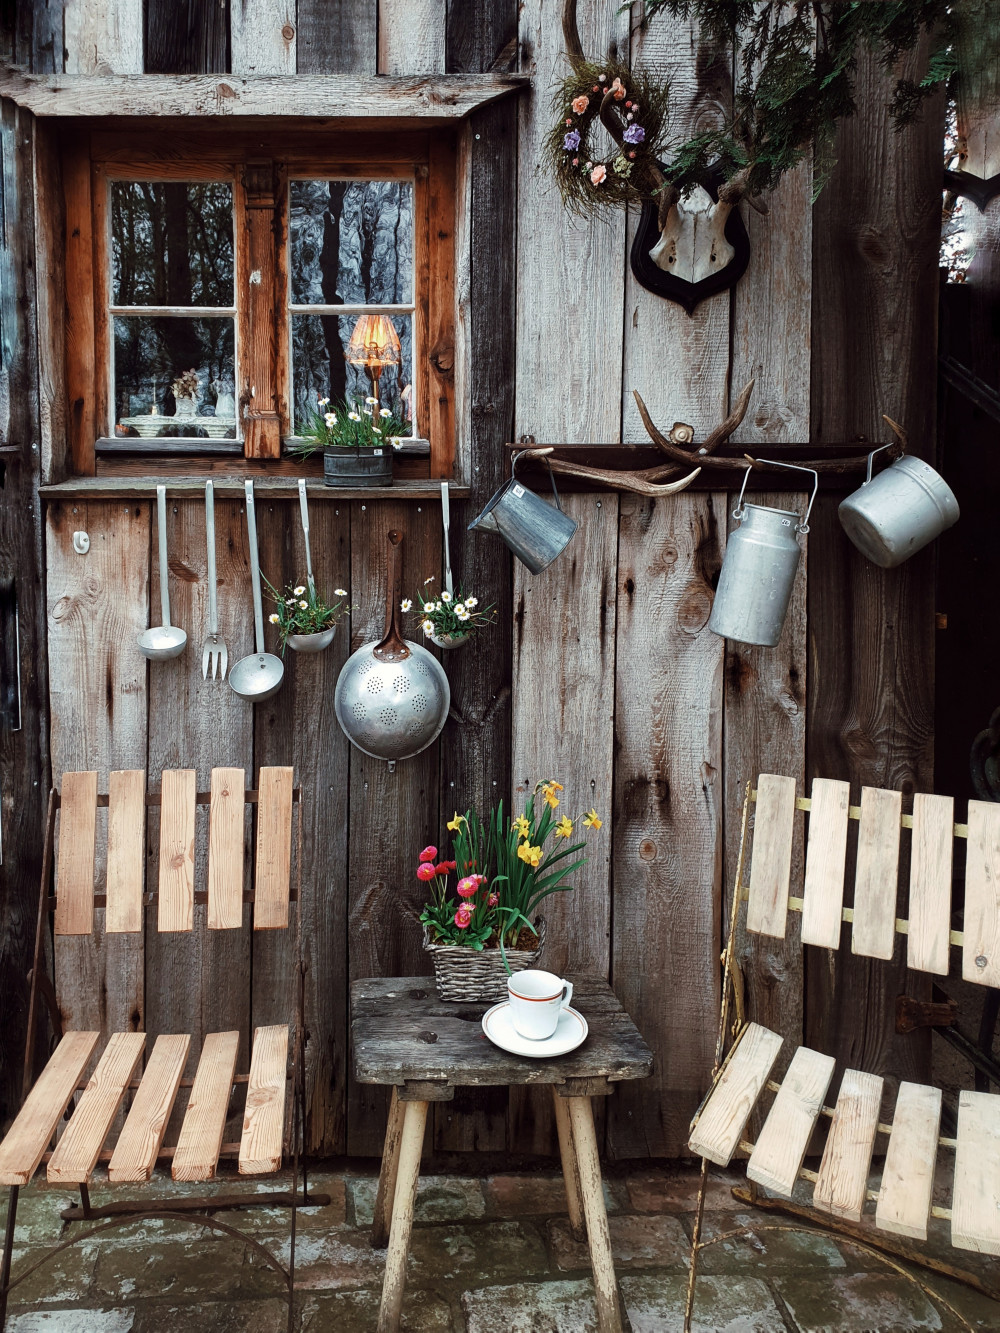 Twelve tips to make your garden and outbuildings more secure. CREDIT: Pexels